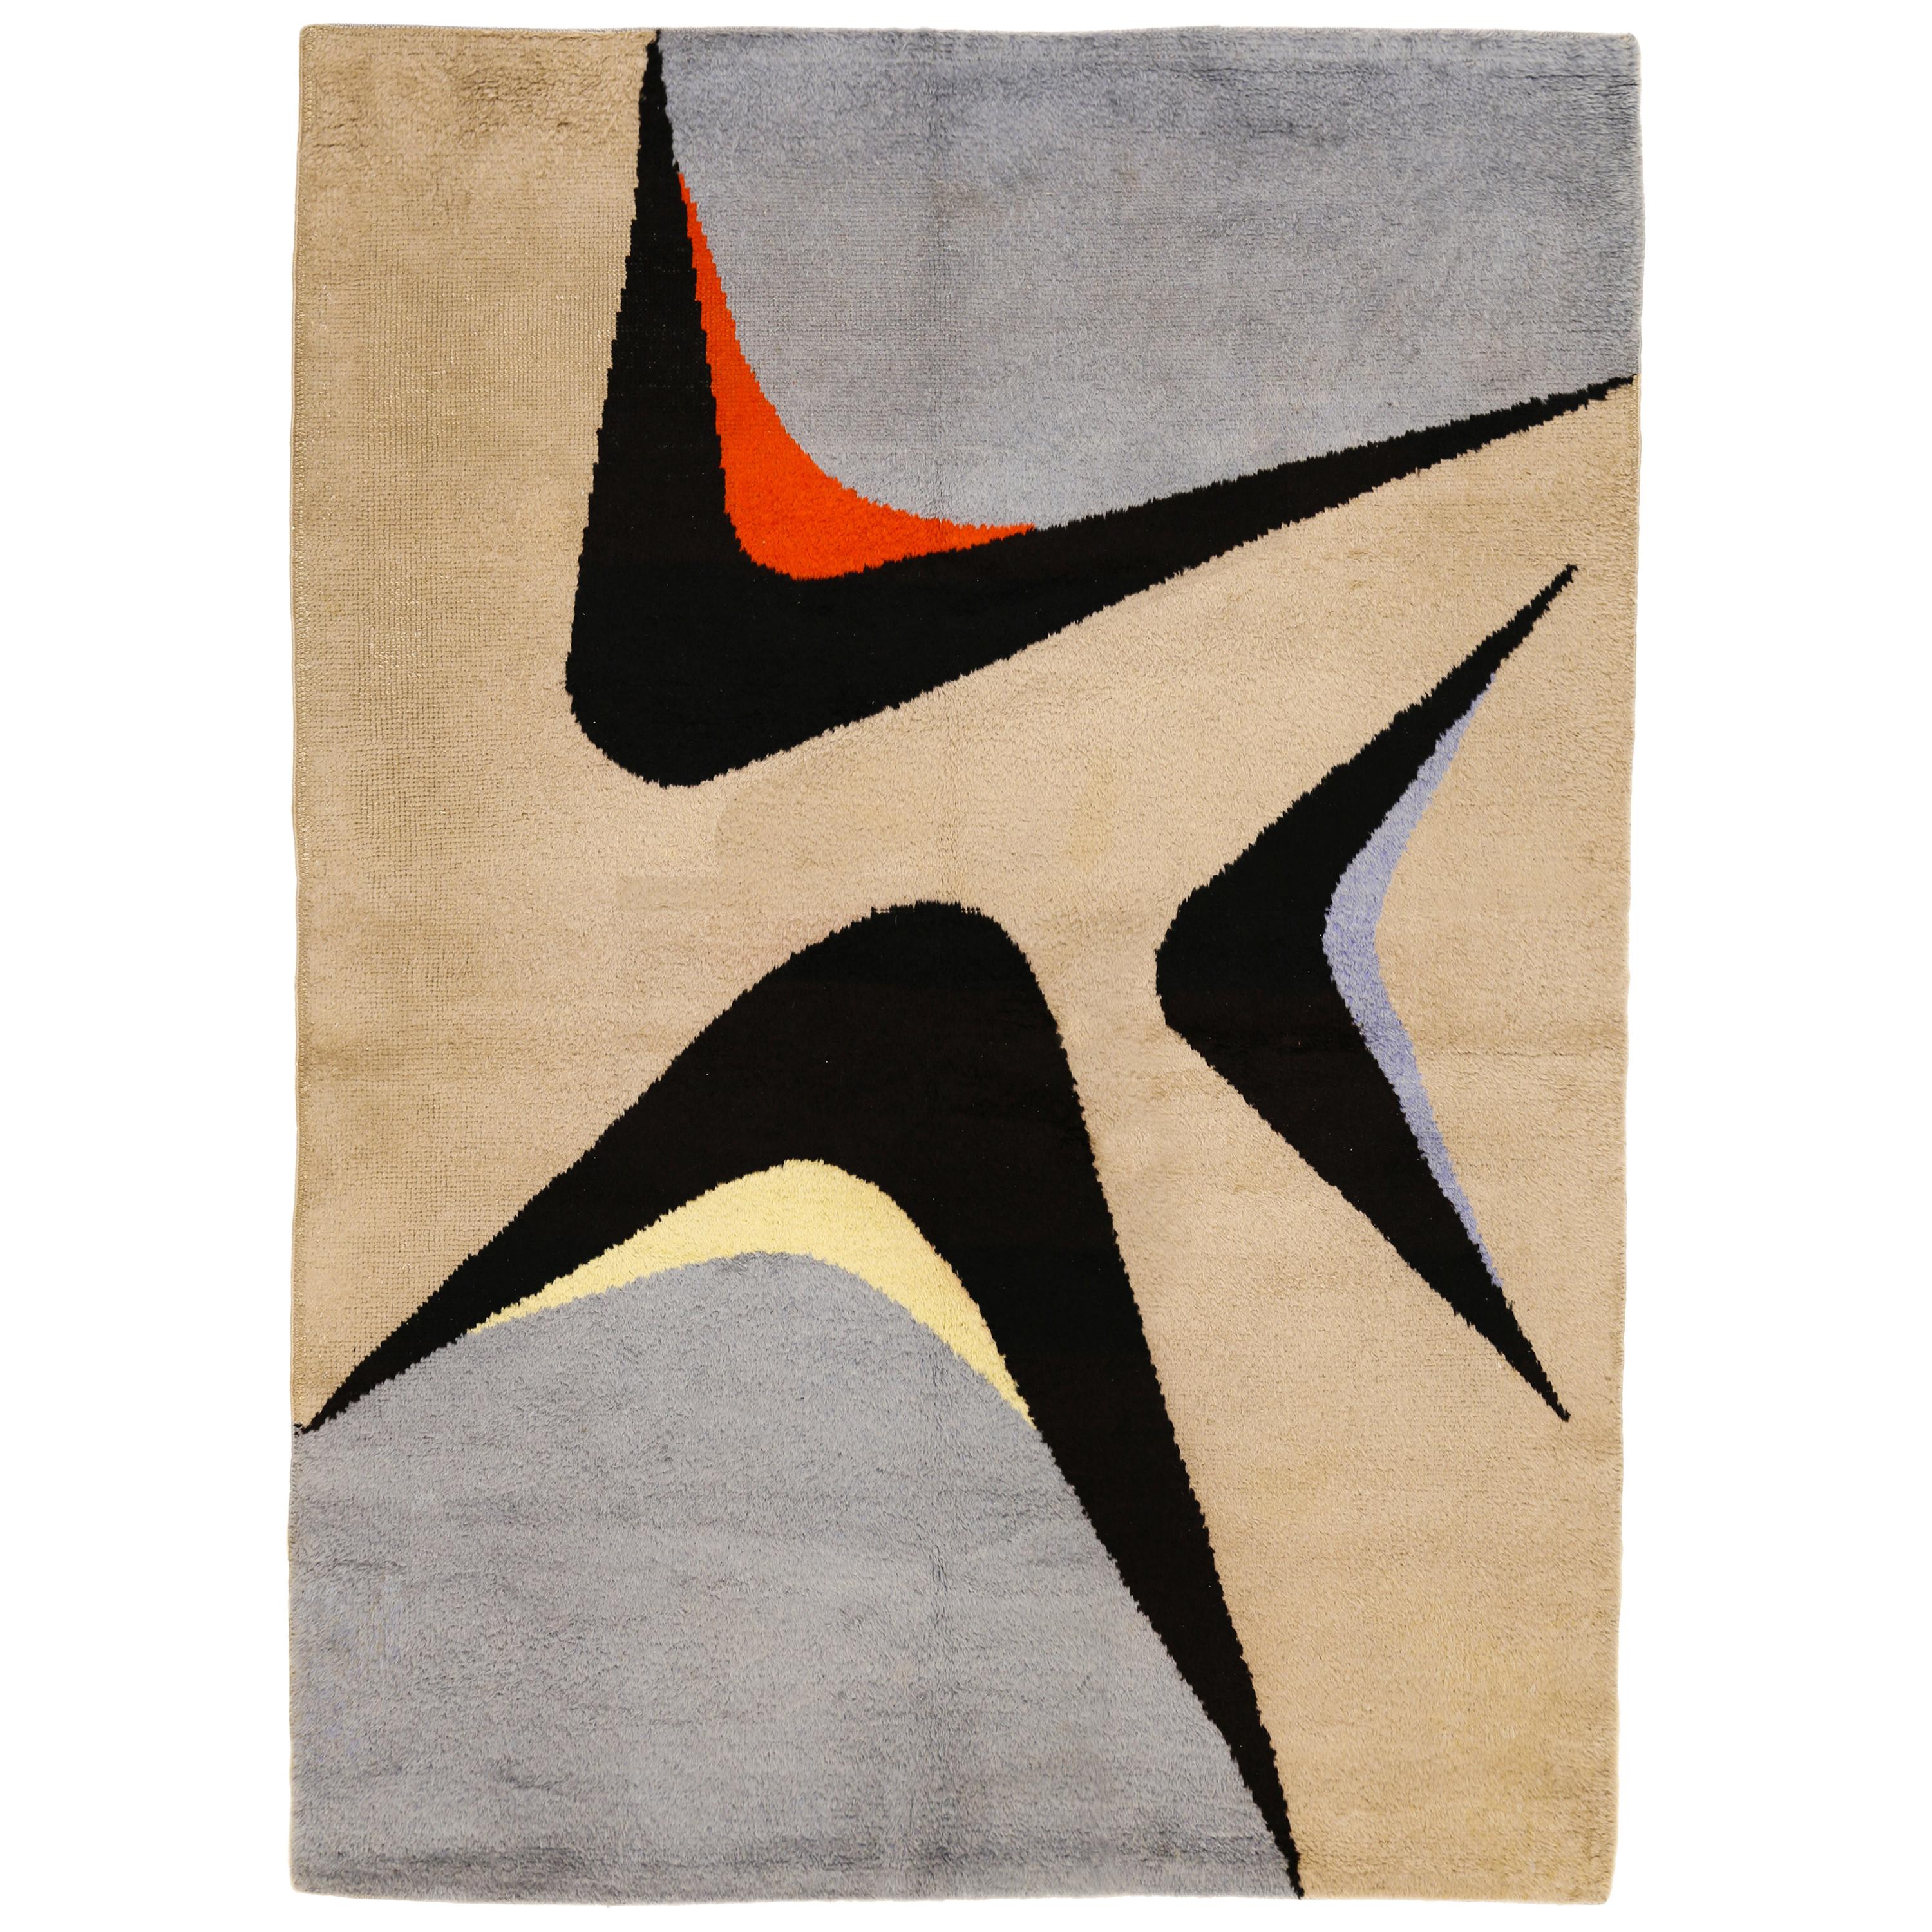 French Midcentury Design Rug by Jacques Borker